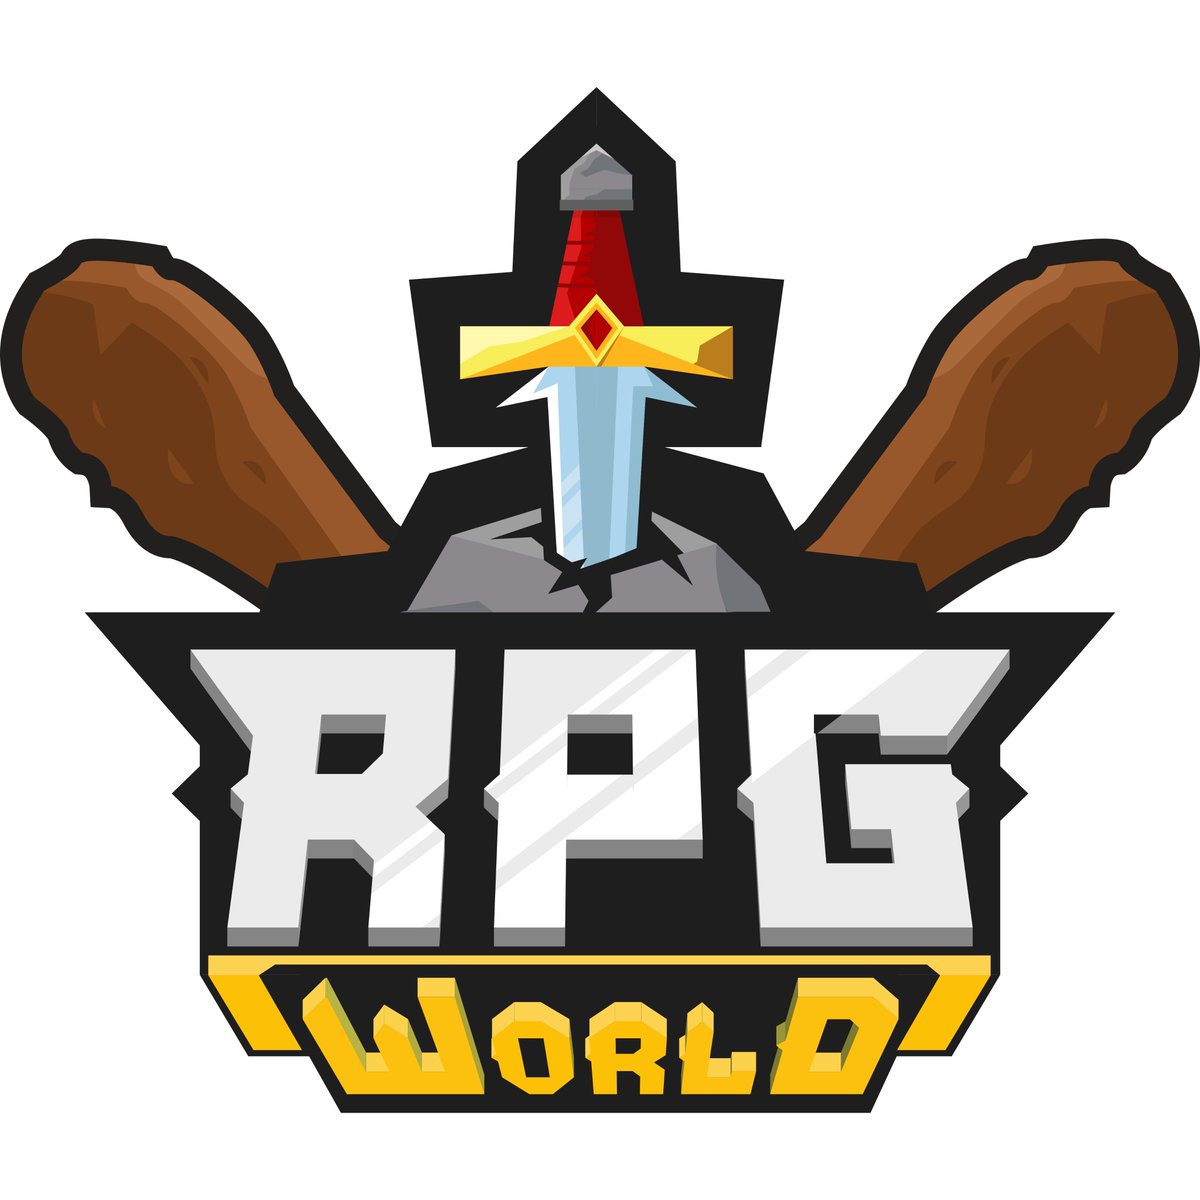 If You Lost Your Data In Rpgworld Contact Kinekreature To Help